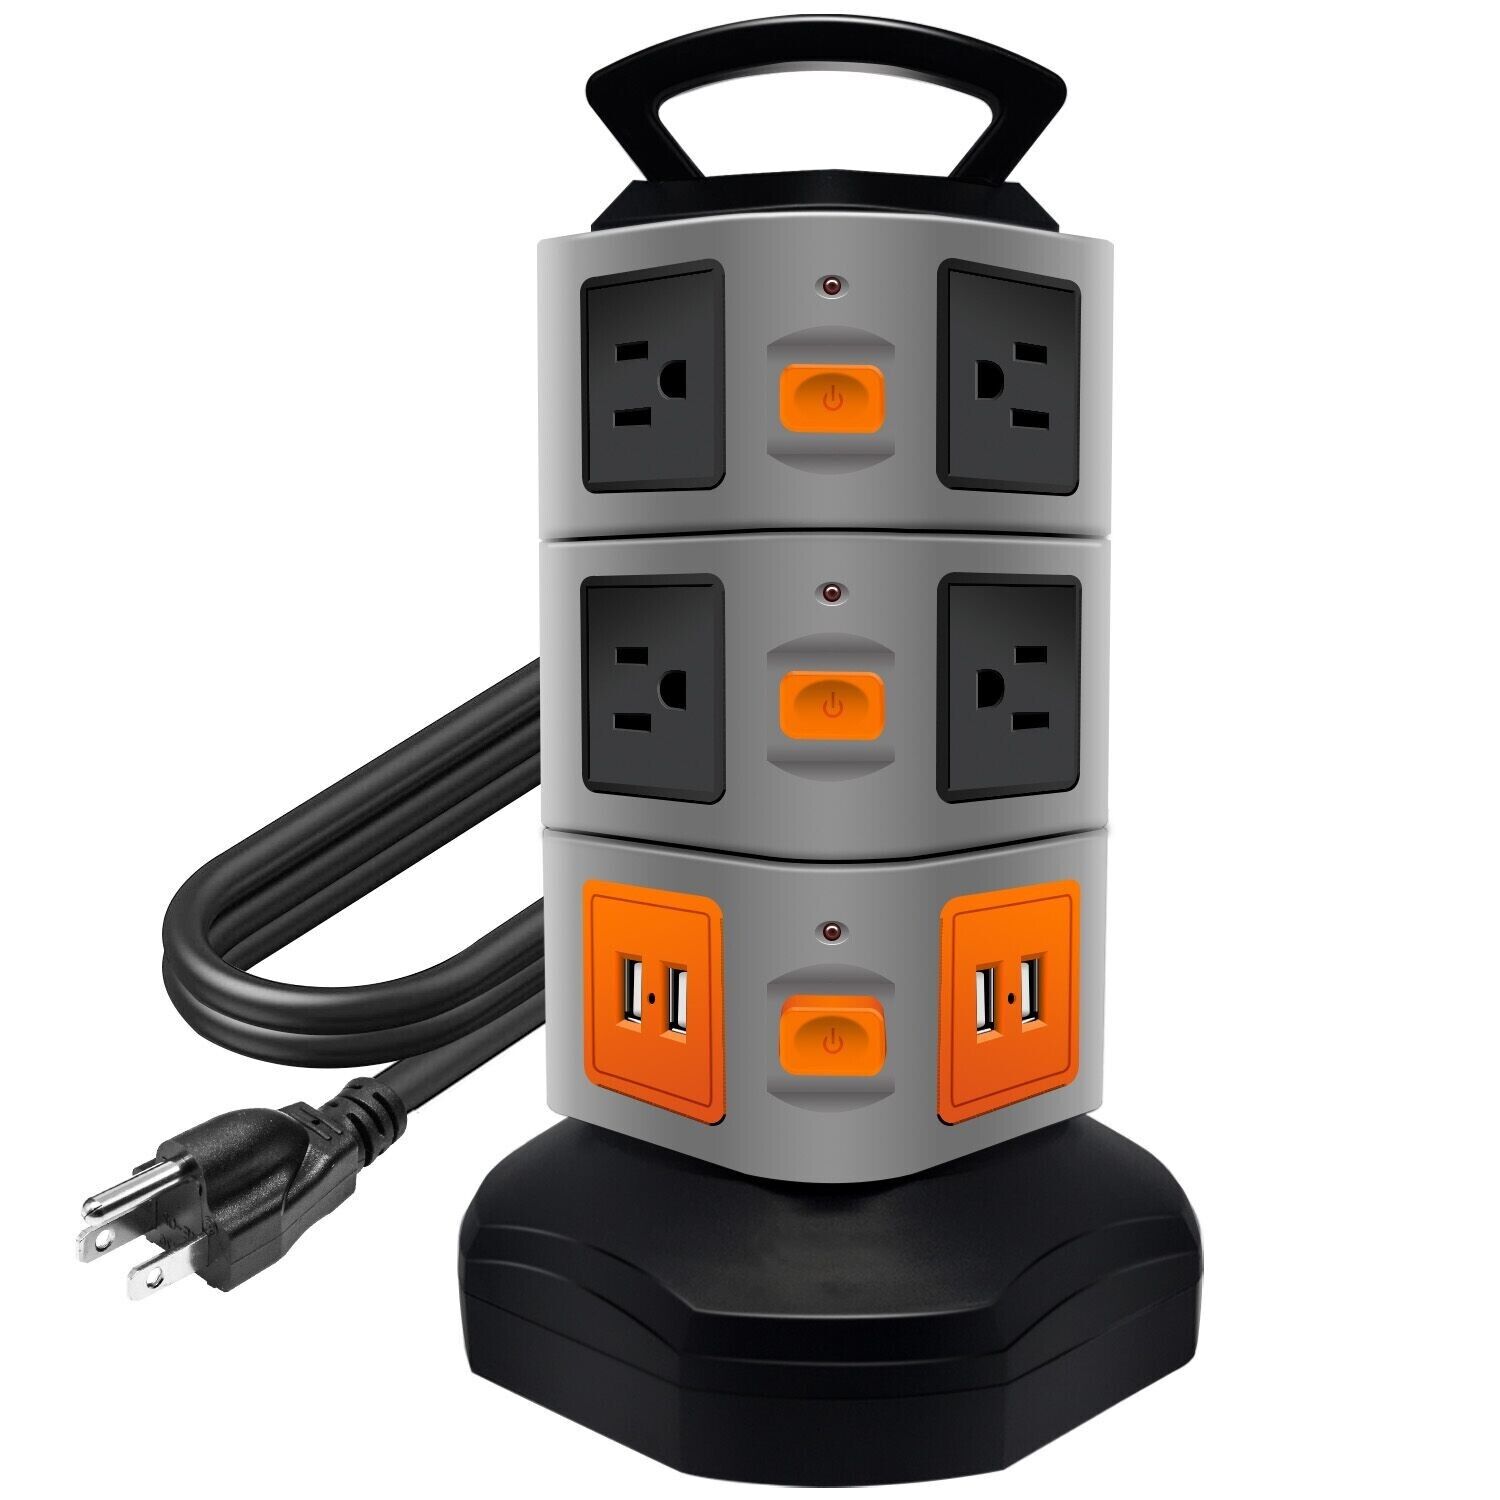 Multi-outlet power tower Vertical Rotating Overload protector 4 USB / 10 Outlets